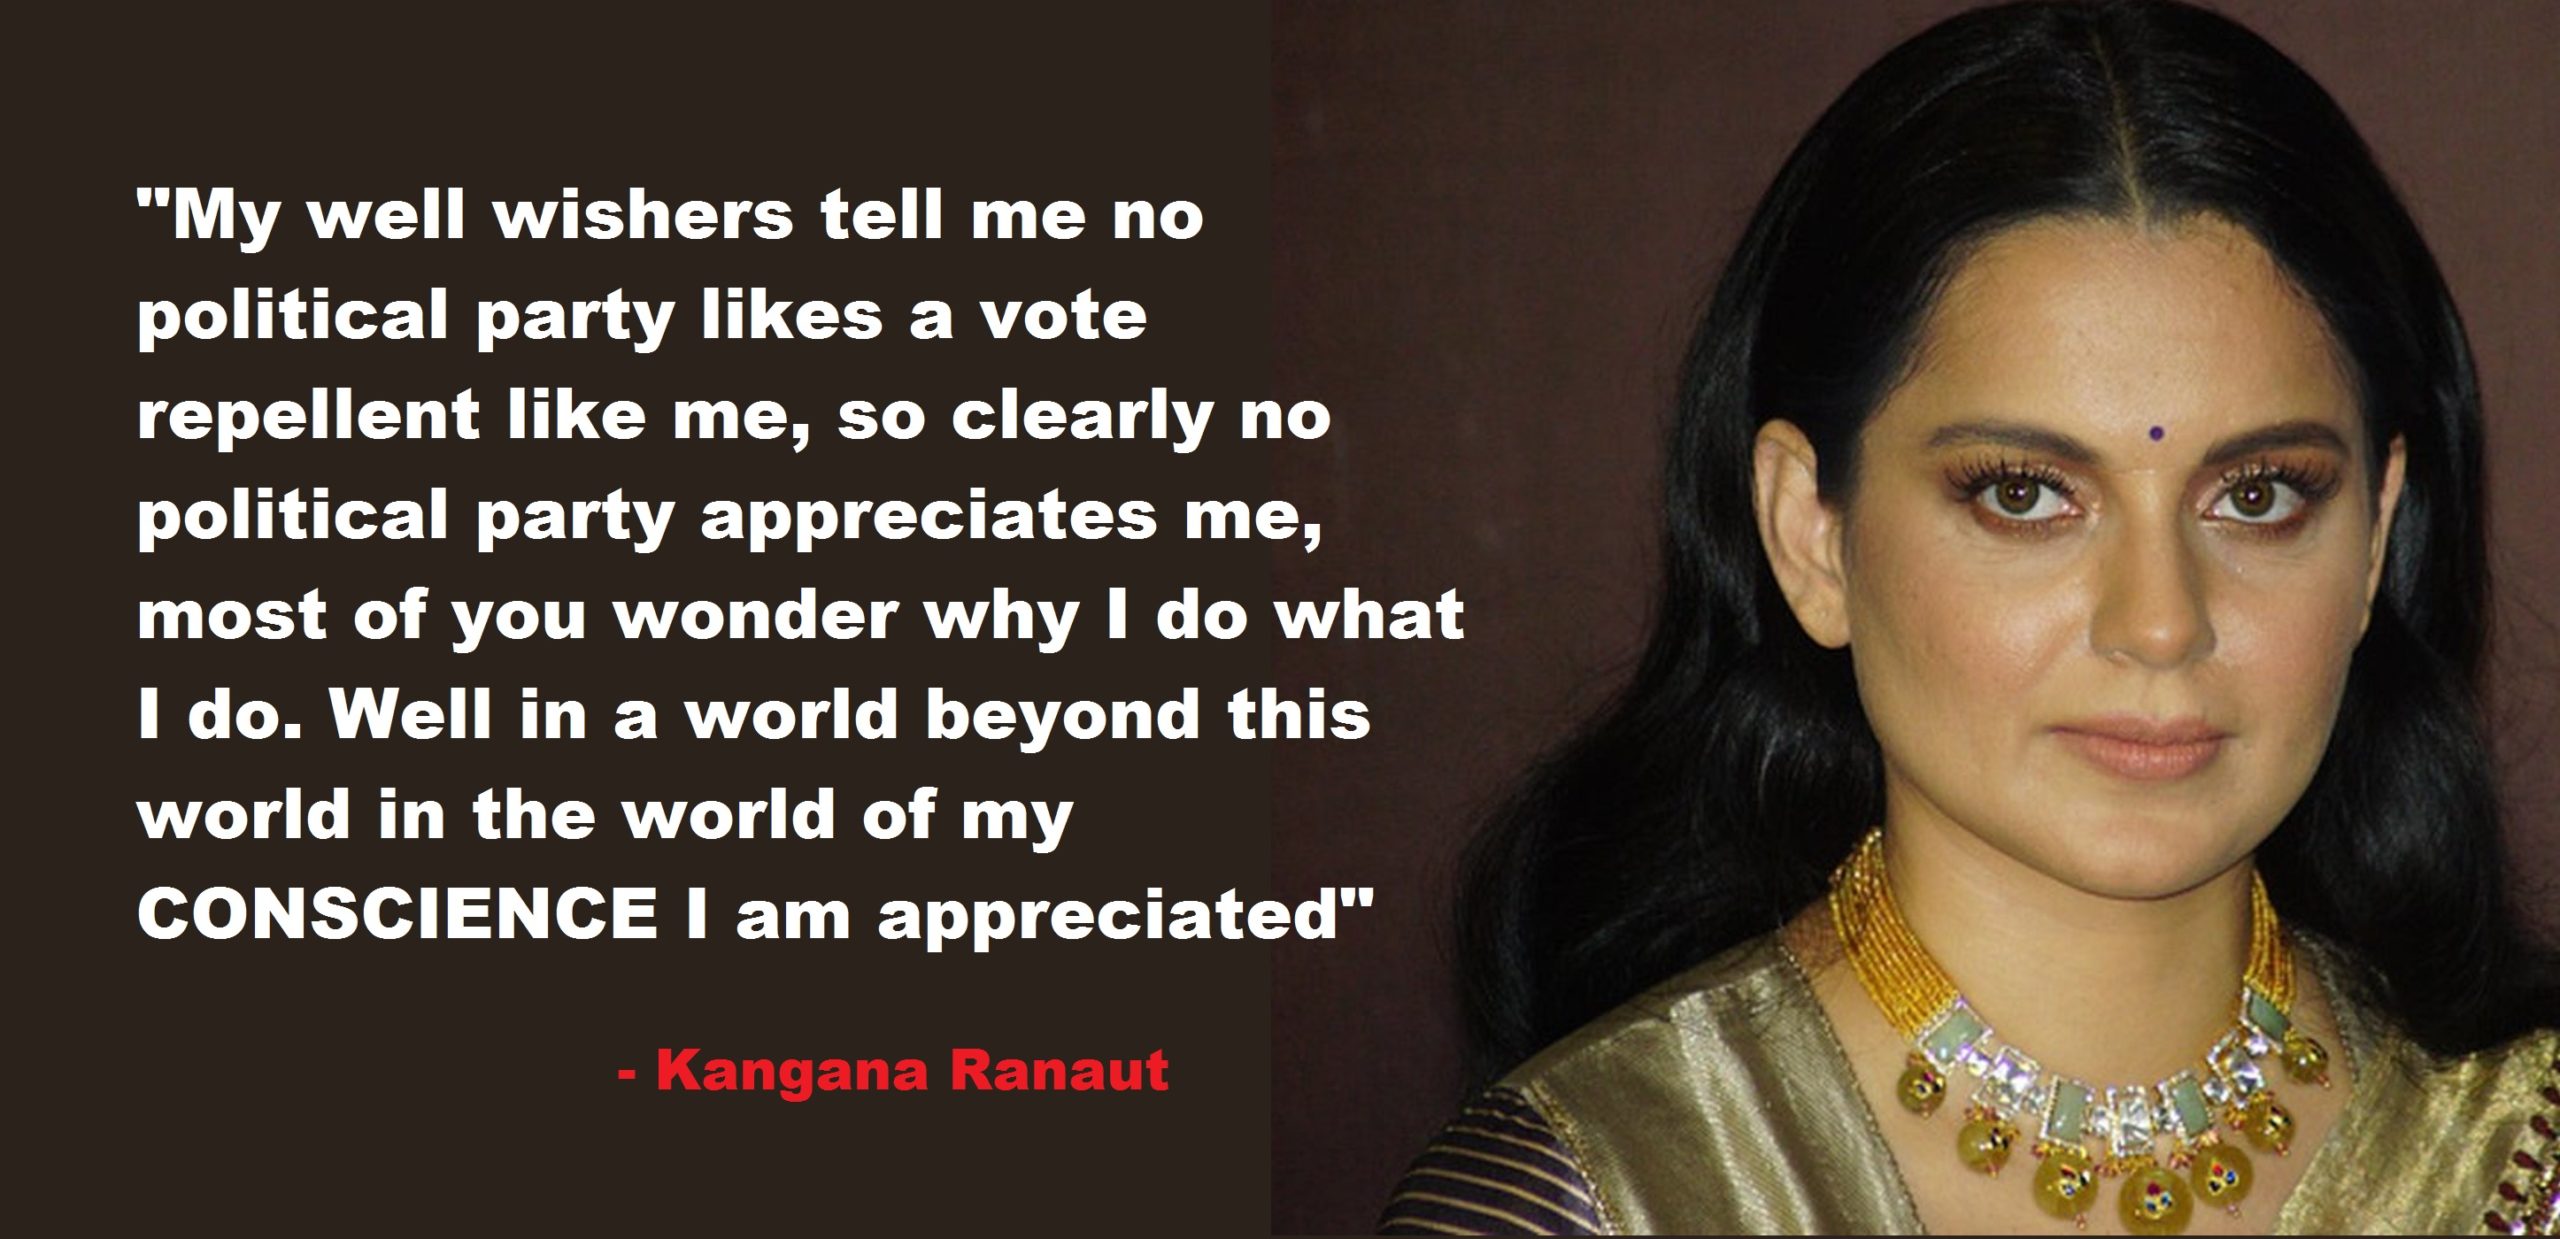 Kangana Ranaut On Angering Different People Through Her Outspokenness, “In The World of My Conscience I Am Appreciated”